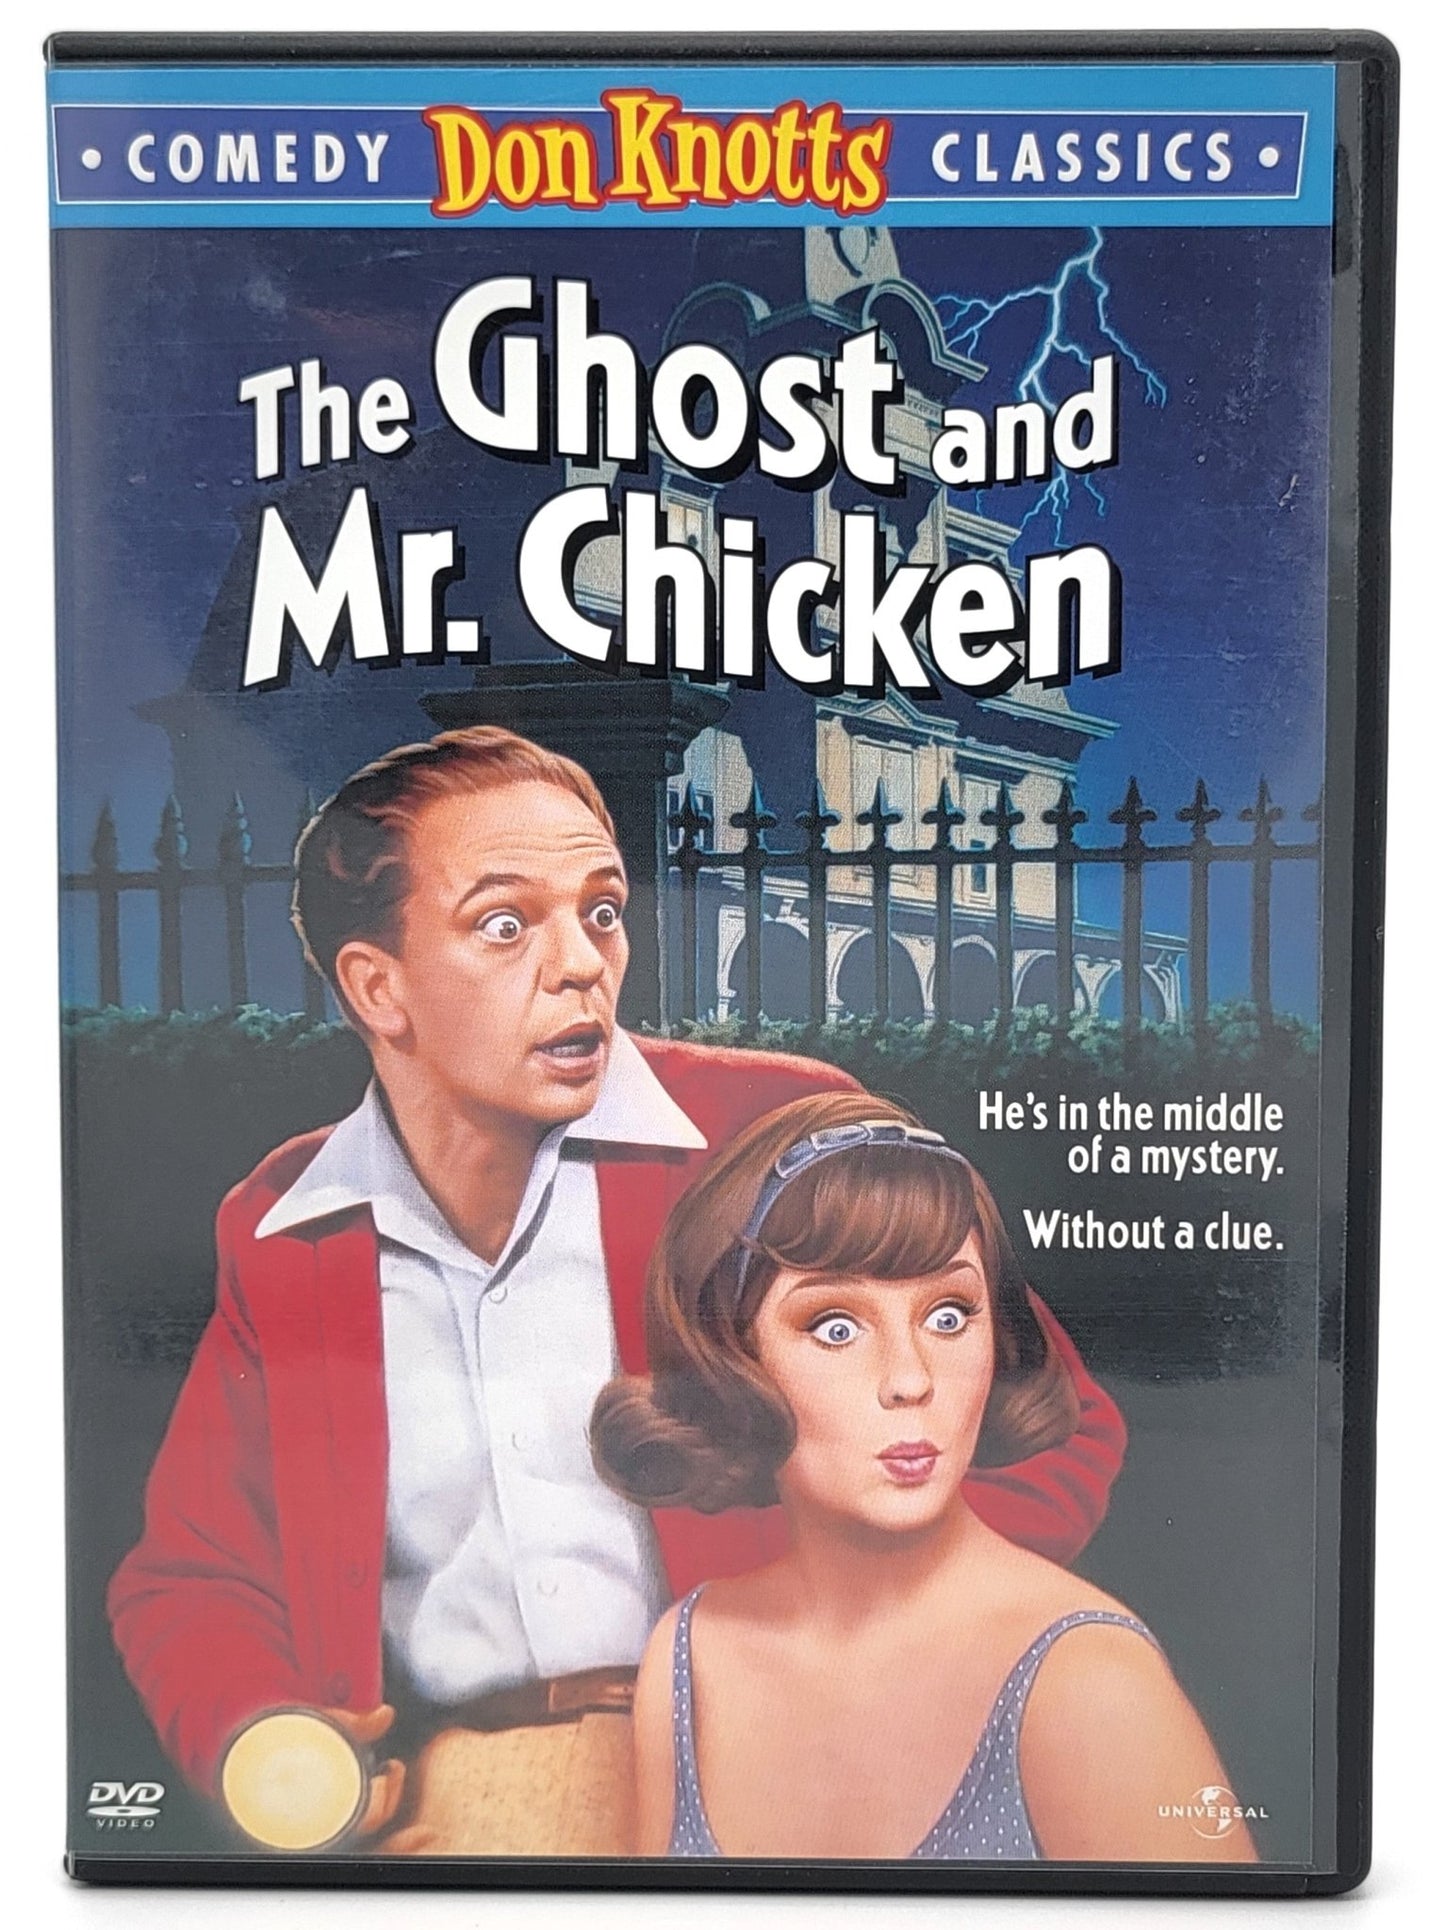 Universal Studios Home Entertainment - The Ghost and Mr. Chicken | DVD | Widescreen - Don Knotts Classics - DVD - Steady Bunny Shop